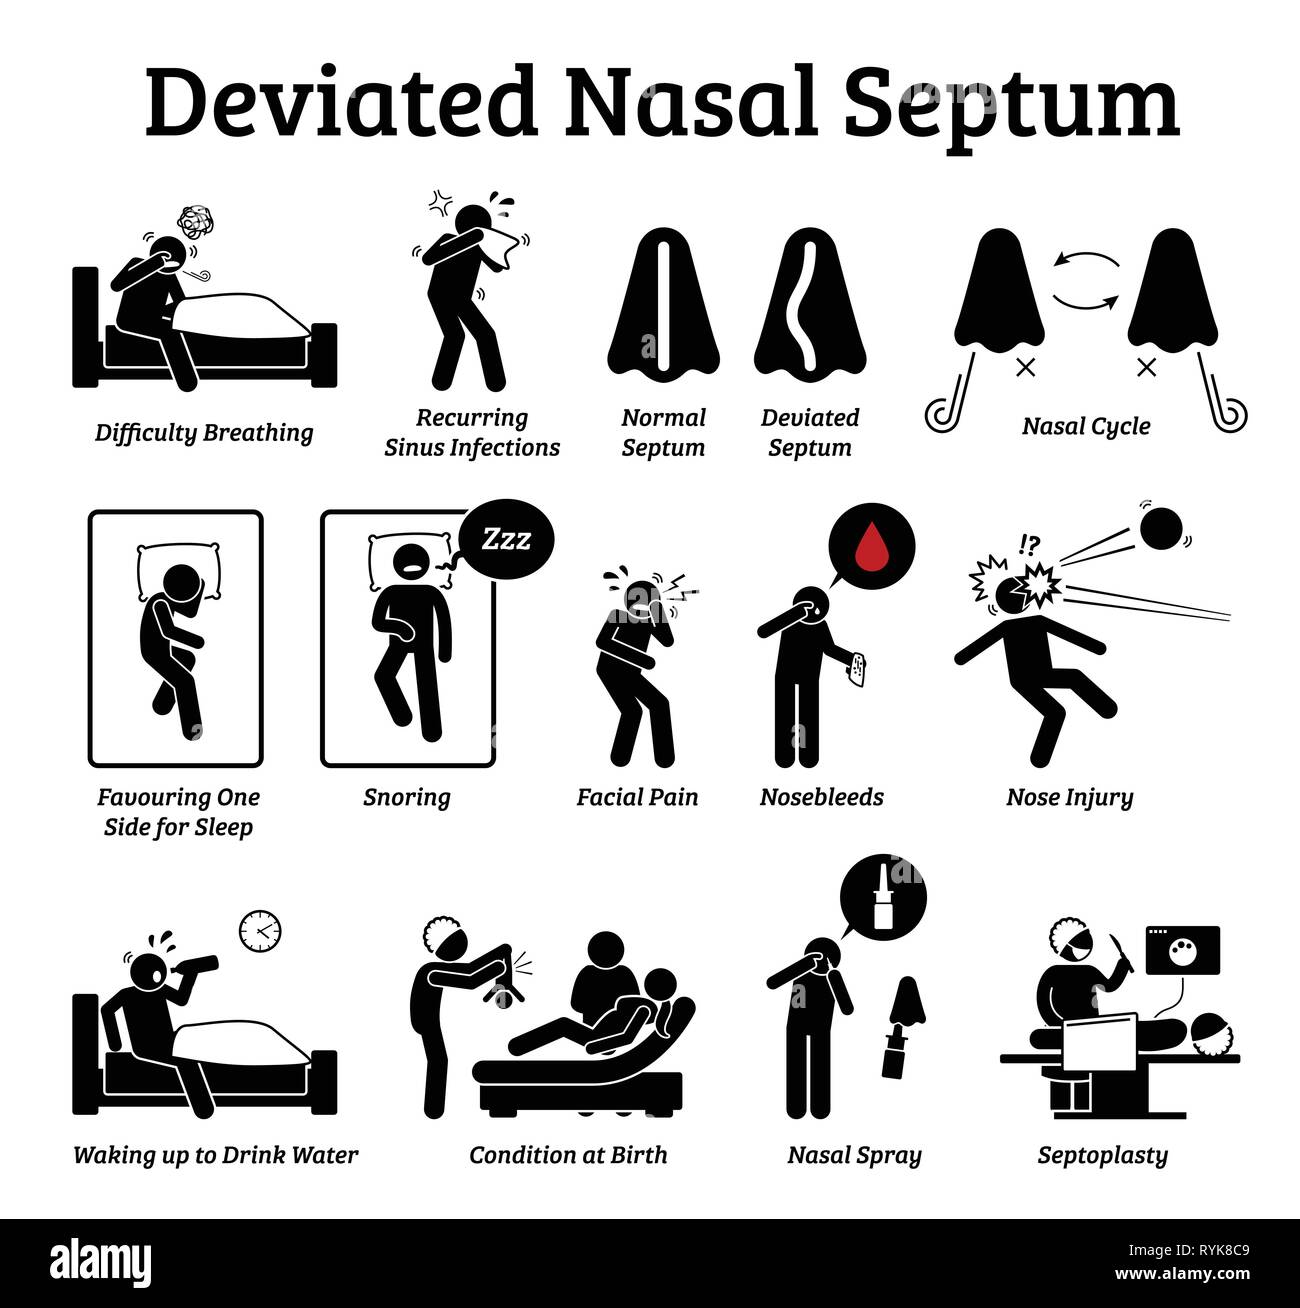 Deviated nasal septum icons. Illustrations depict signs and symptoms of nose problem. Difficulty breathing, sinus infection, snoring, and facial pain. Stock Vector